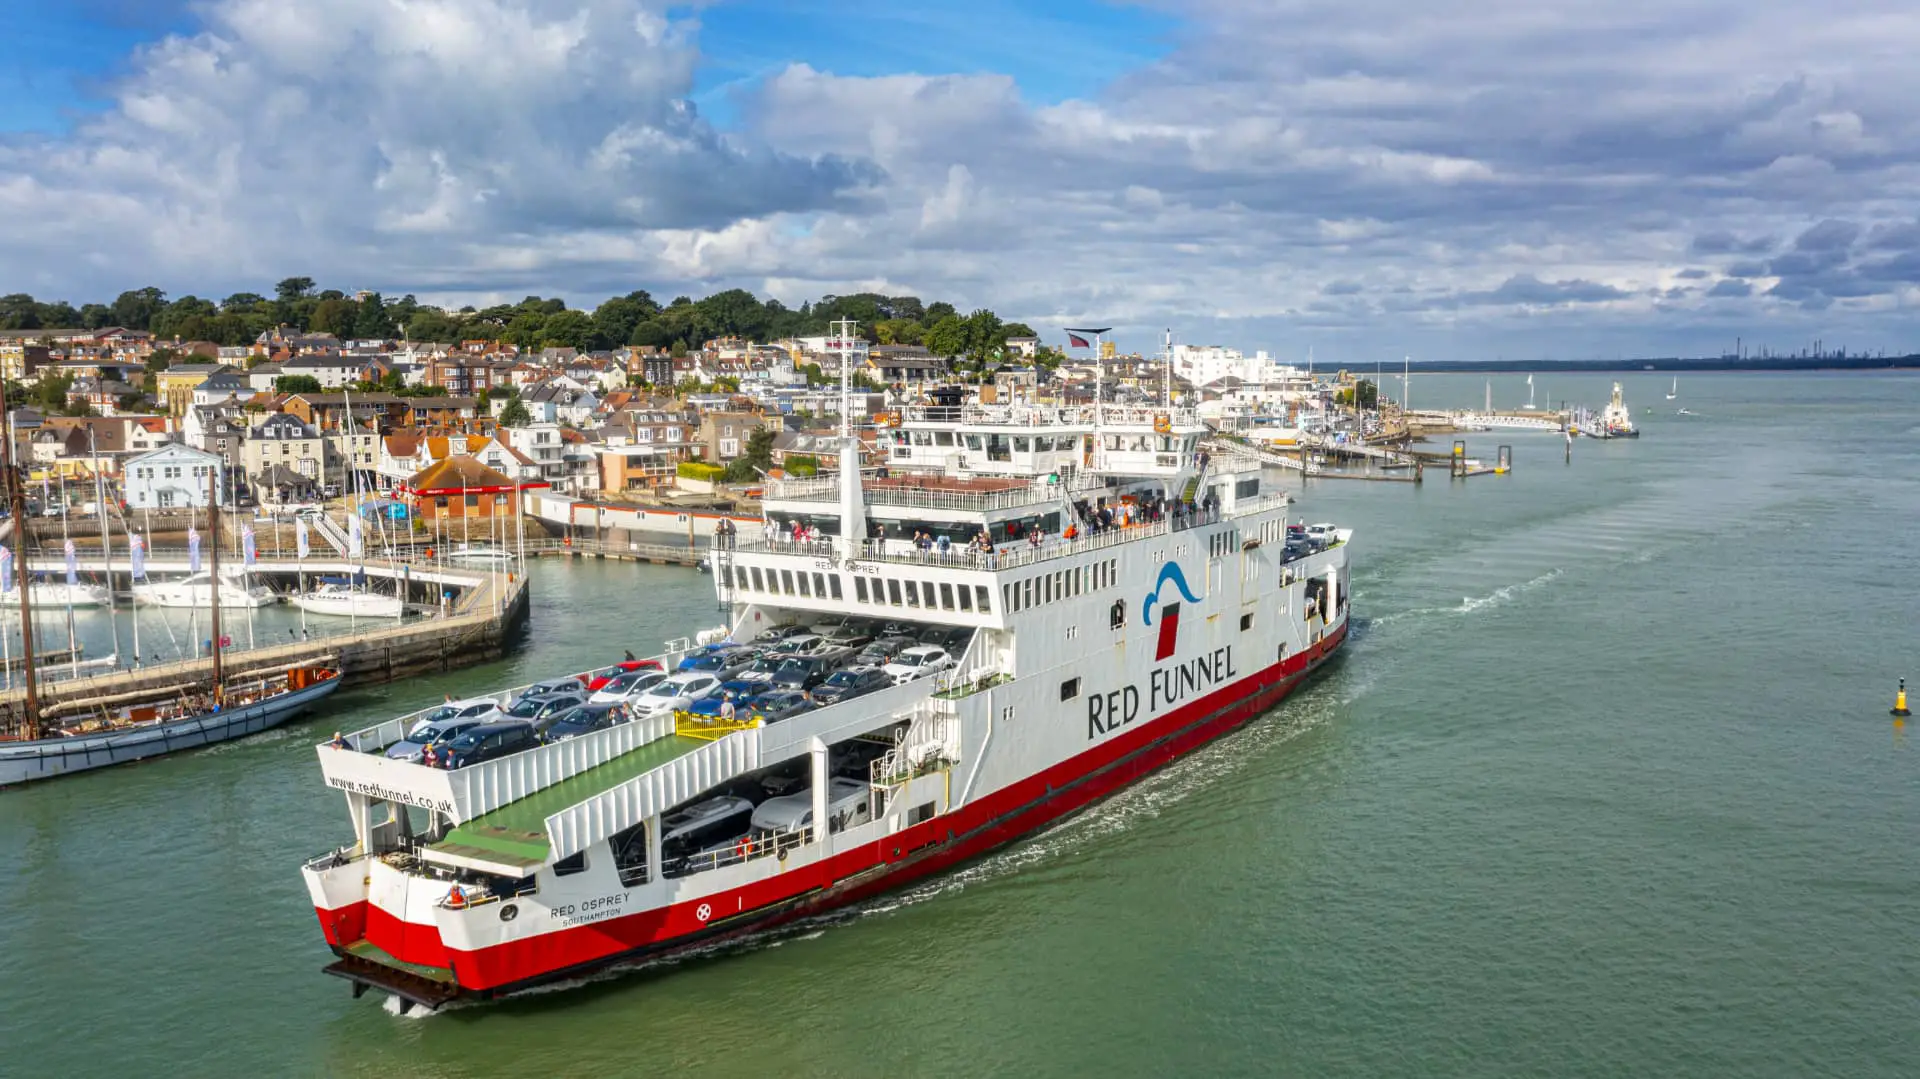 Red Funnel Ferry leaving East Cowes